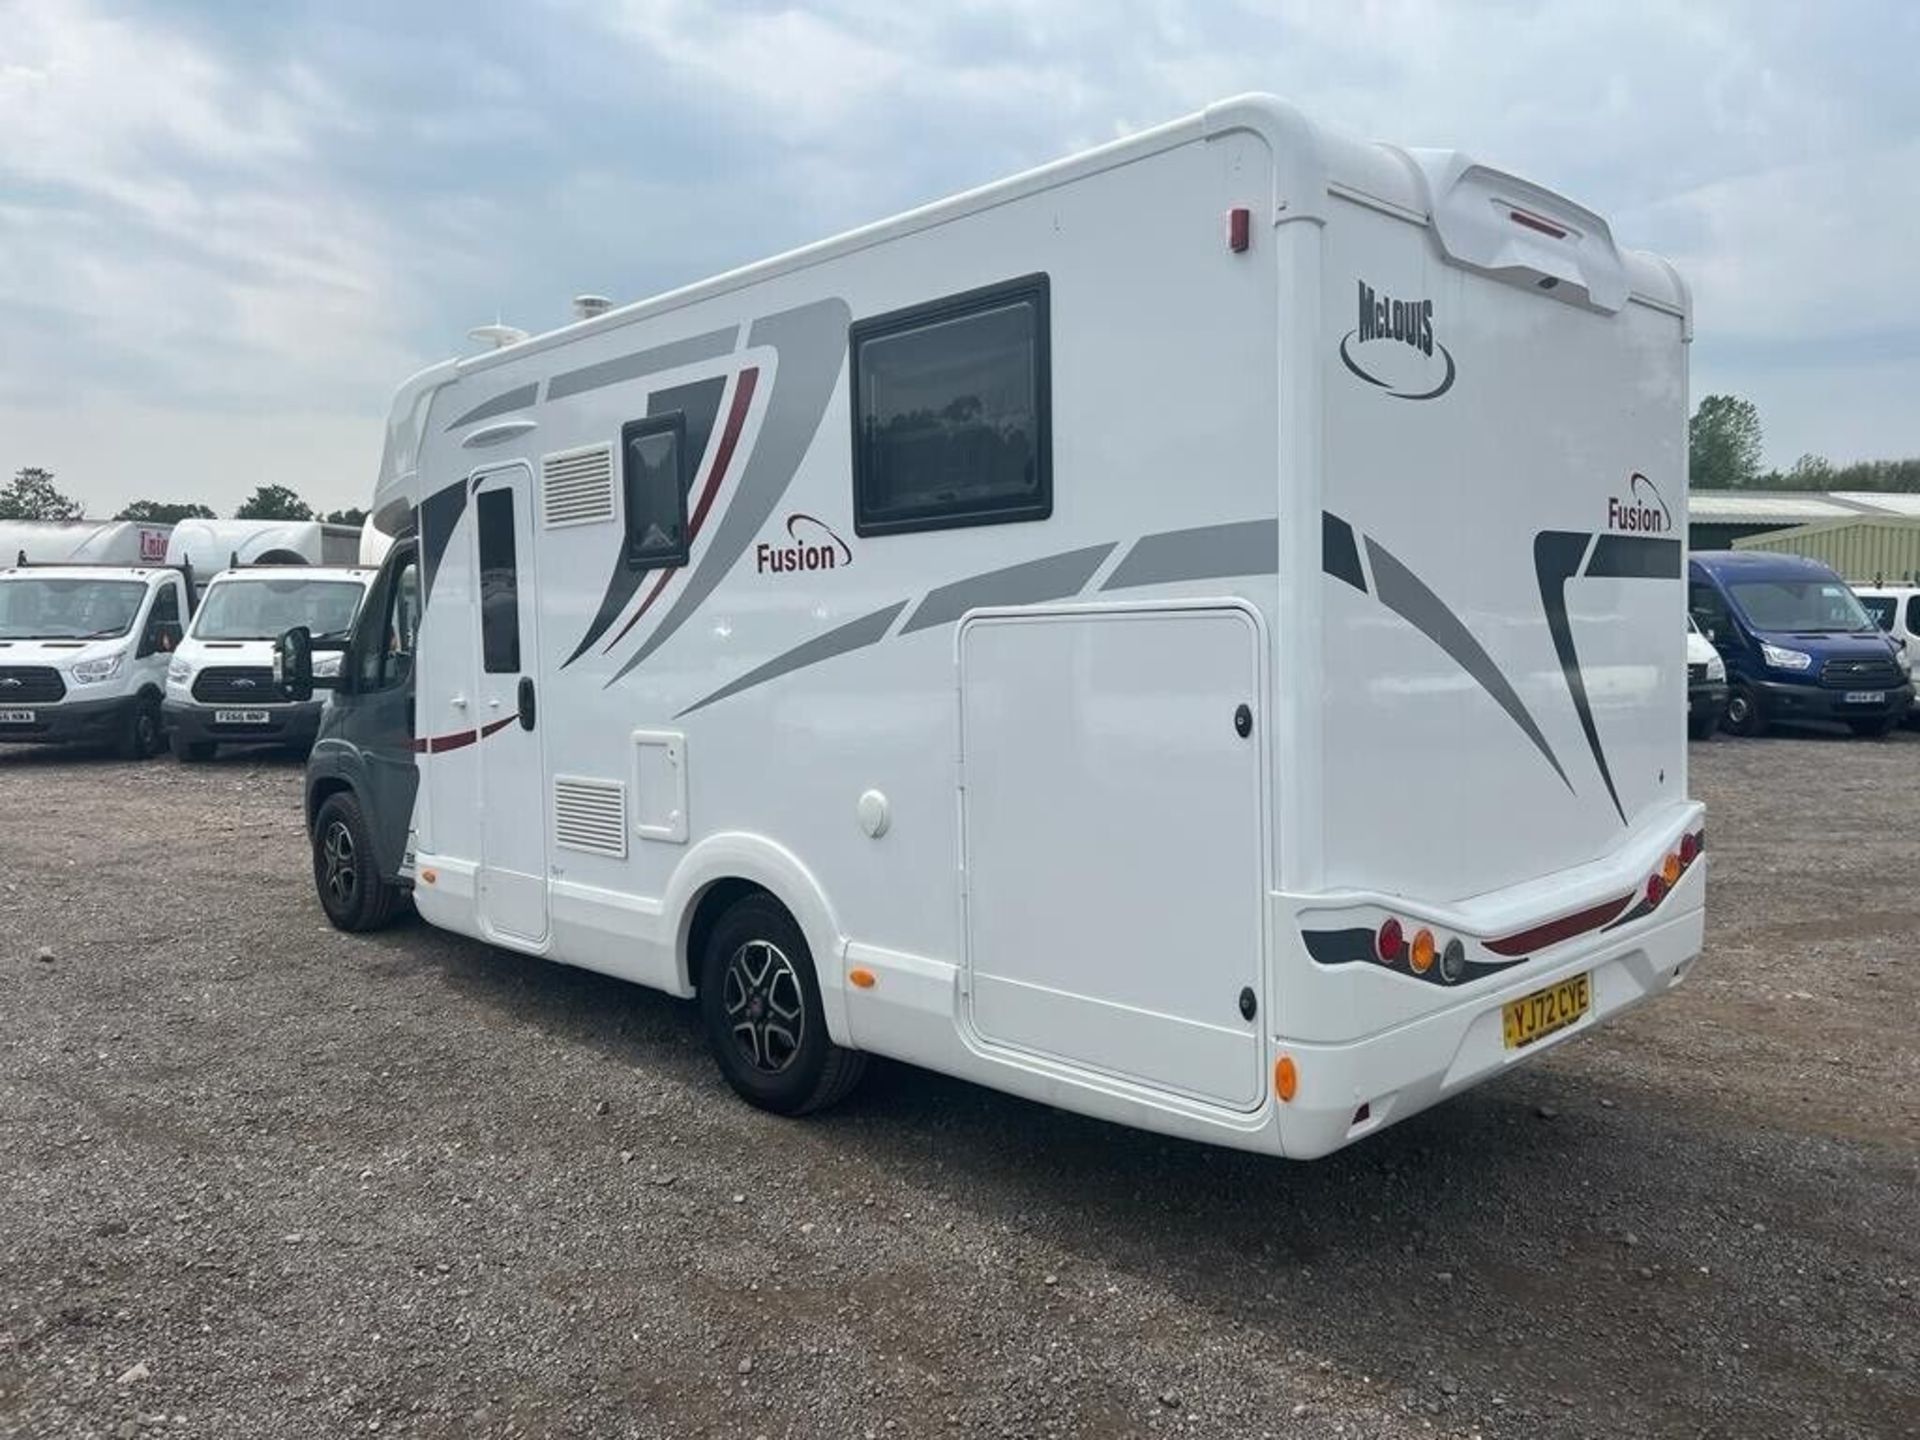 2 PLATE FIAT MCLOUIS FUSION 367: IMMACULATE MOTORHOME JOY >>--NO VAT ON HAMMER--<< - Image 12 of 15